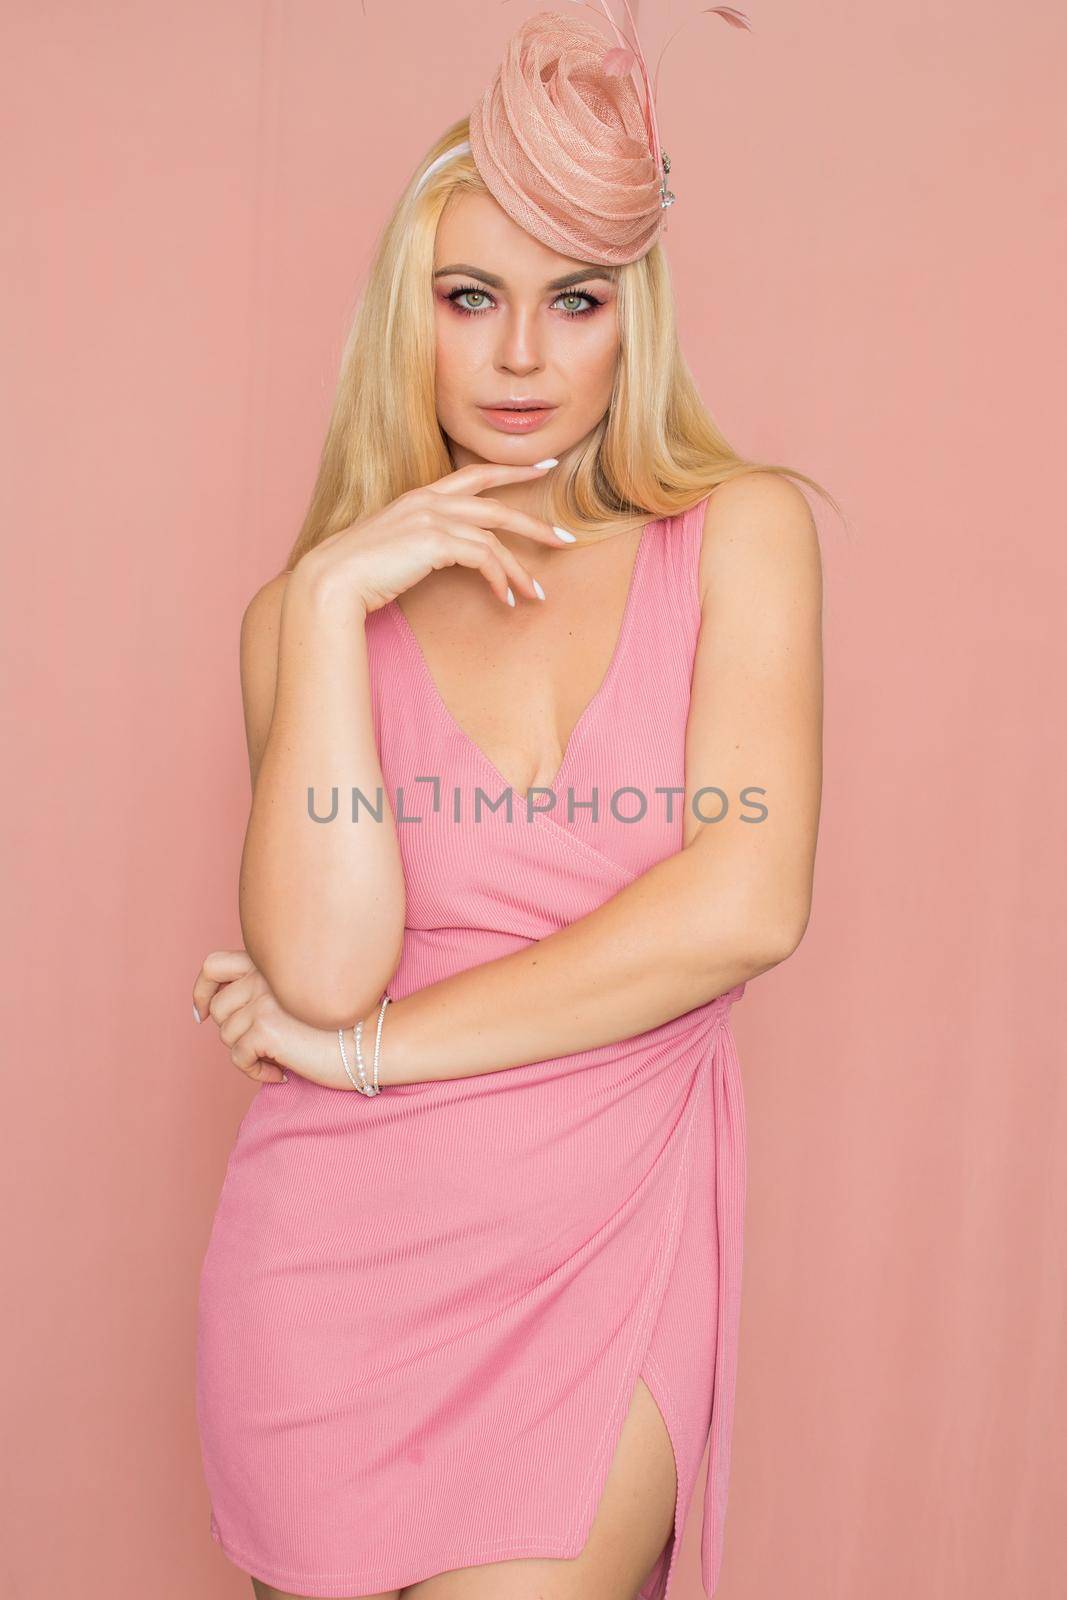 Adult blonde woman in pink dress posing over rosy background. Spring-summer clothing. Wearing hat